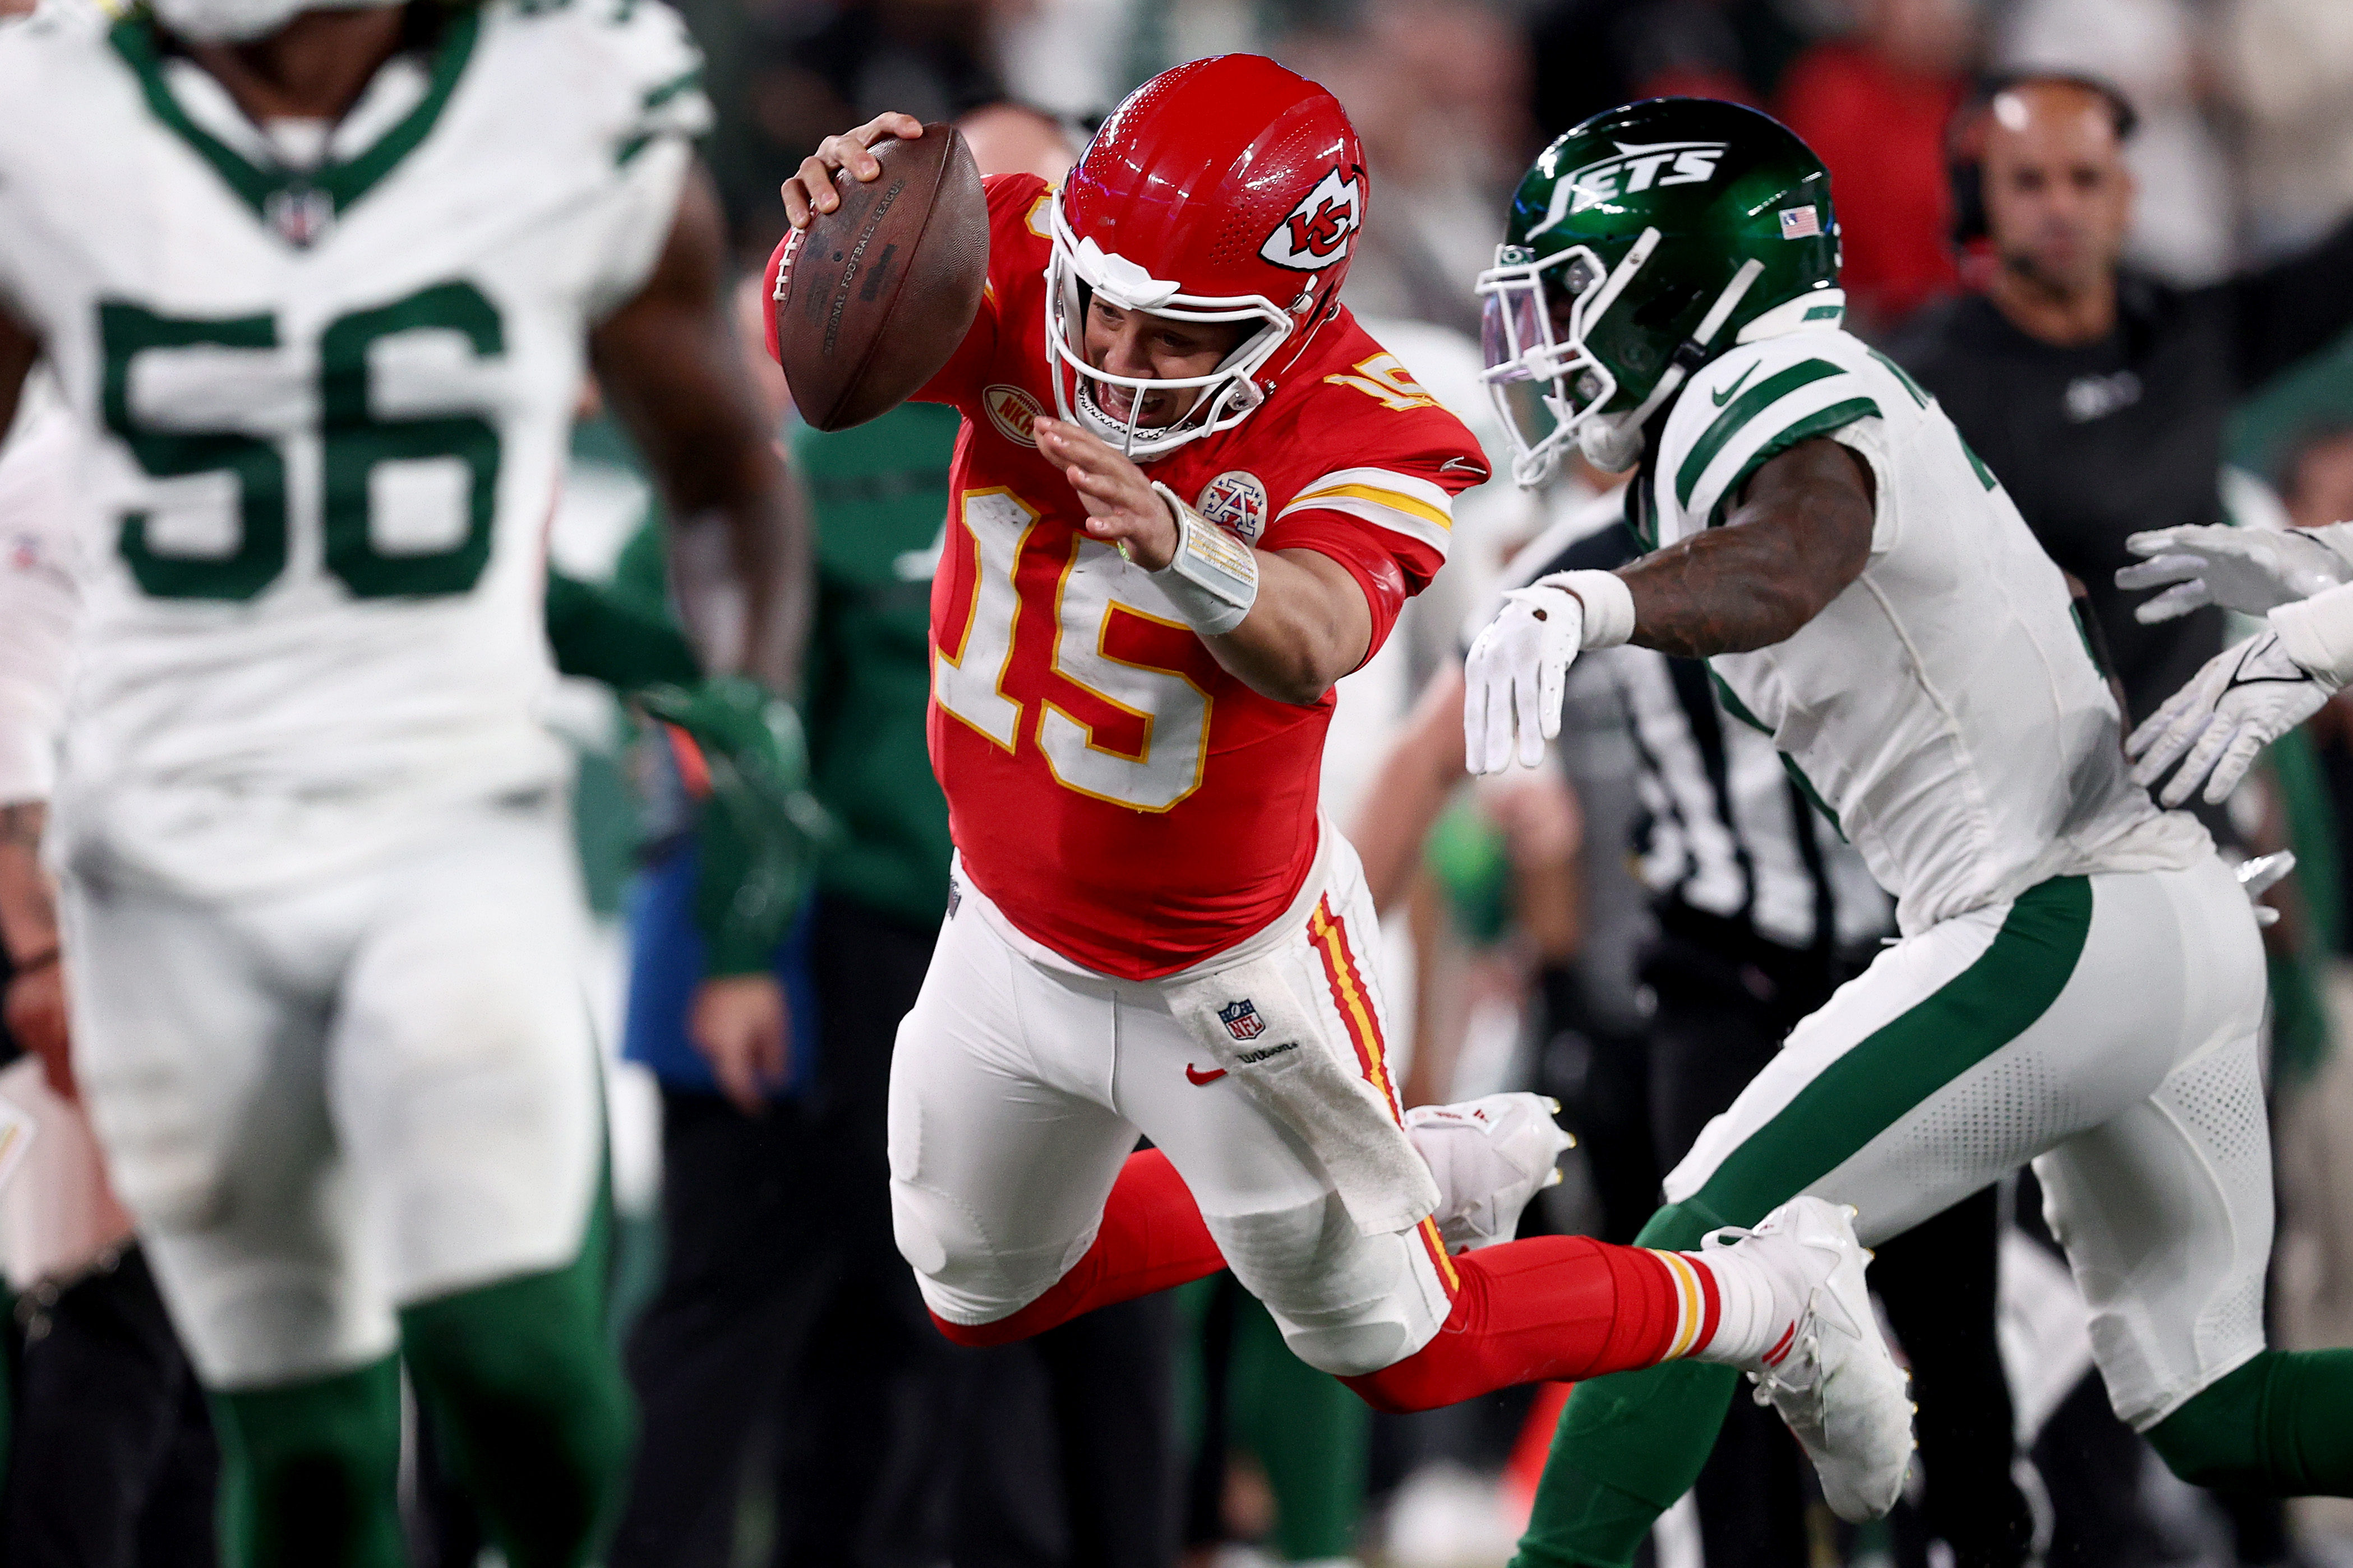 Quarterback Patrick Mahomes (#15) of the Kansas City Chiefs leaps for extra yards in the game against the New York Jets at MetLife Stadium in East Rutherford, New Jersey, October 1, 2023. /CFP